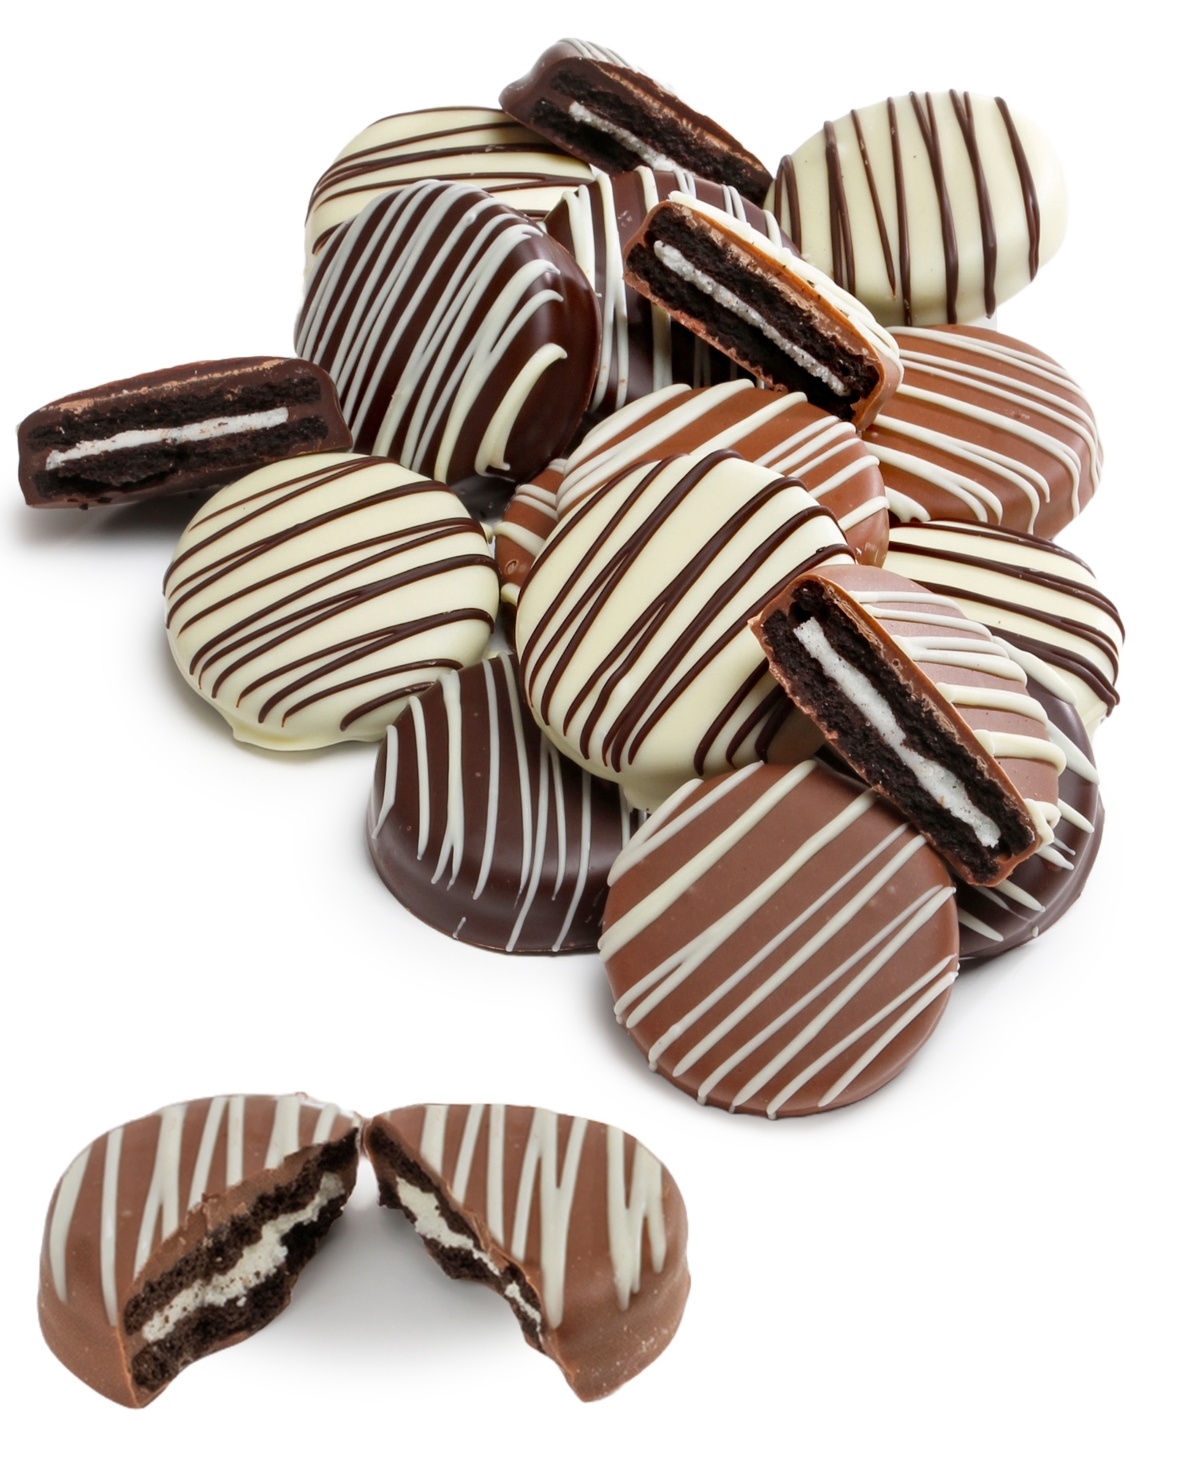 Chocolate Covered Company Classic Belgian Chocolate Covered Oreo Cookies In No Color